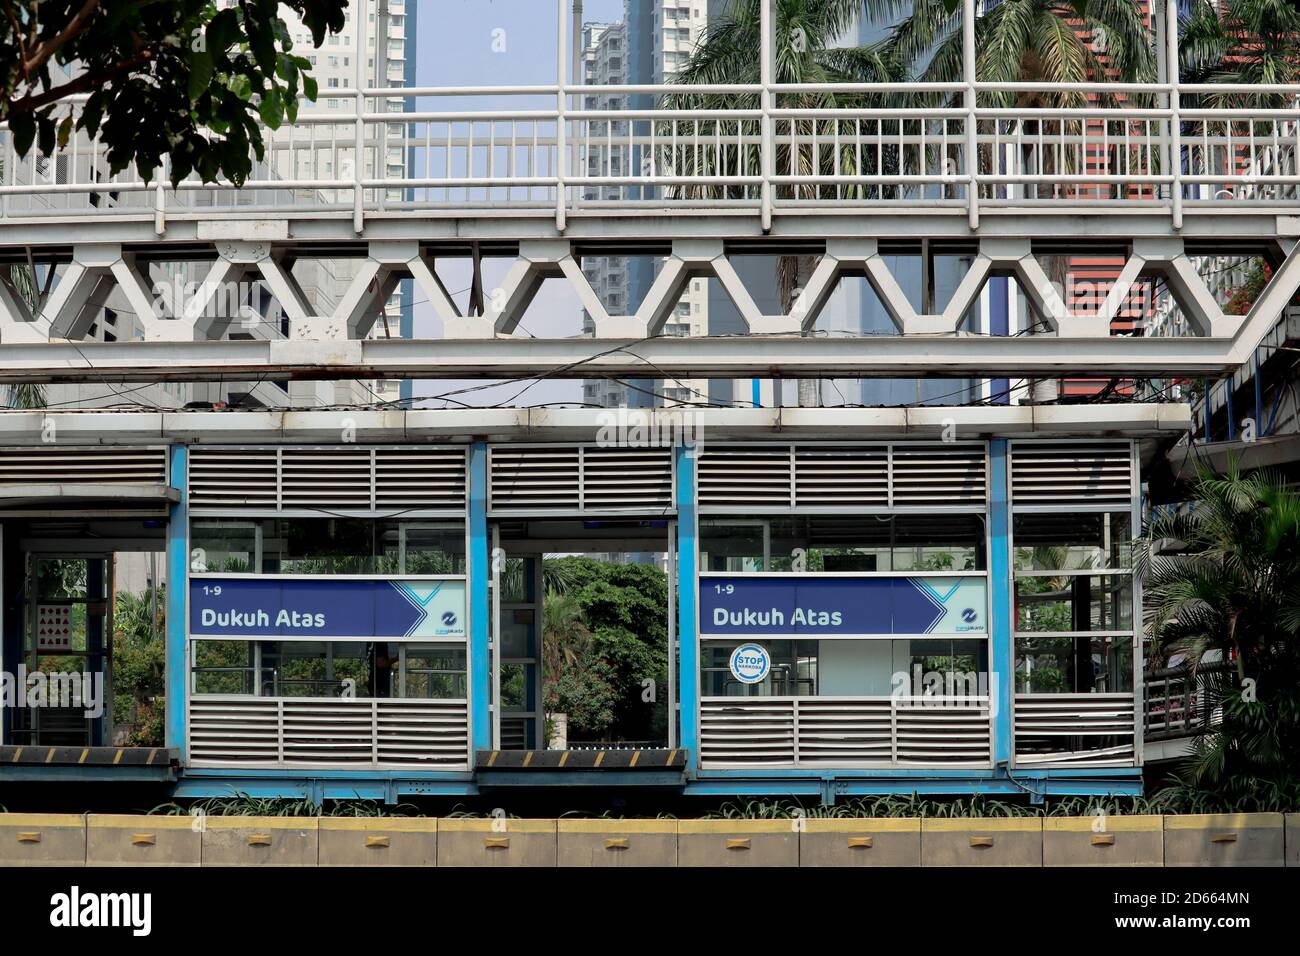 Jakarta / Indonesia - September 5, 2020. The nameplate of the Dukuh Atas stop is a special Transjakarta bus stop Stock Photo